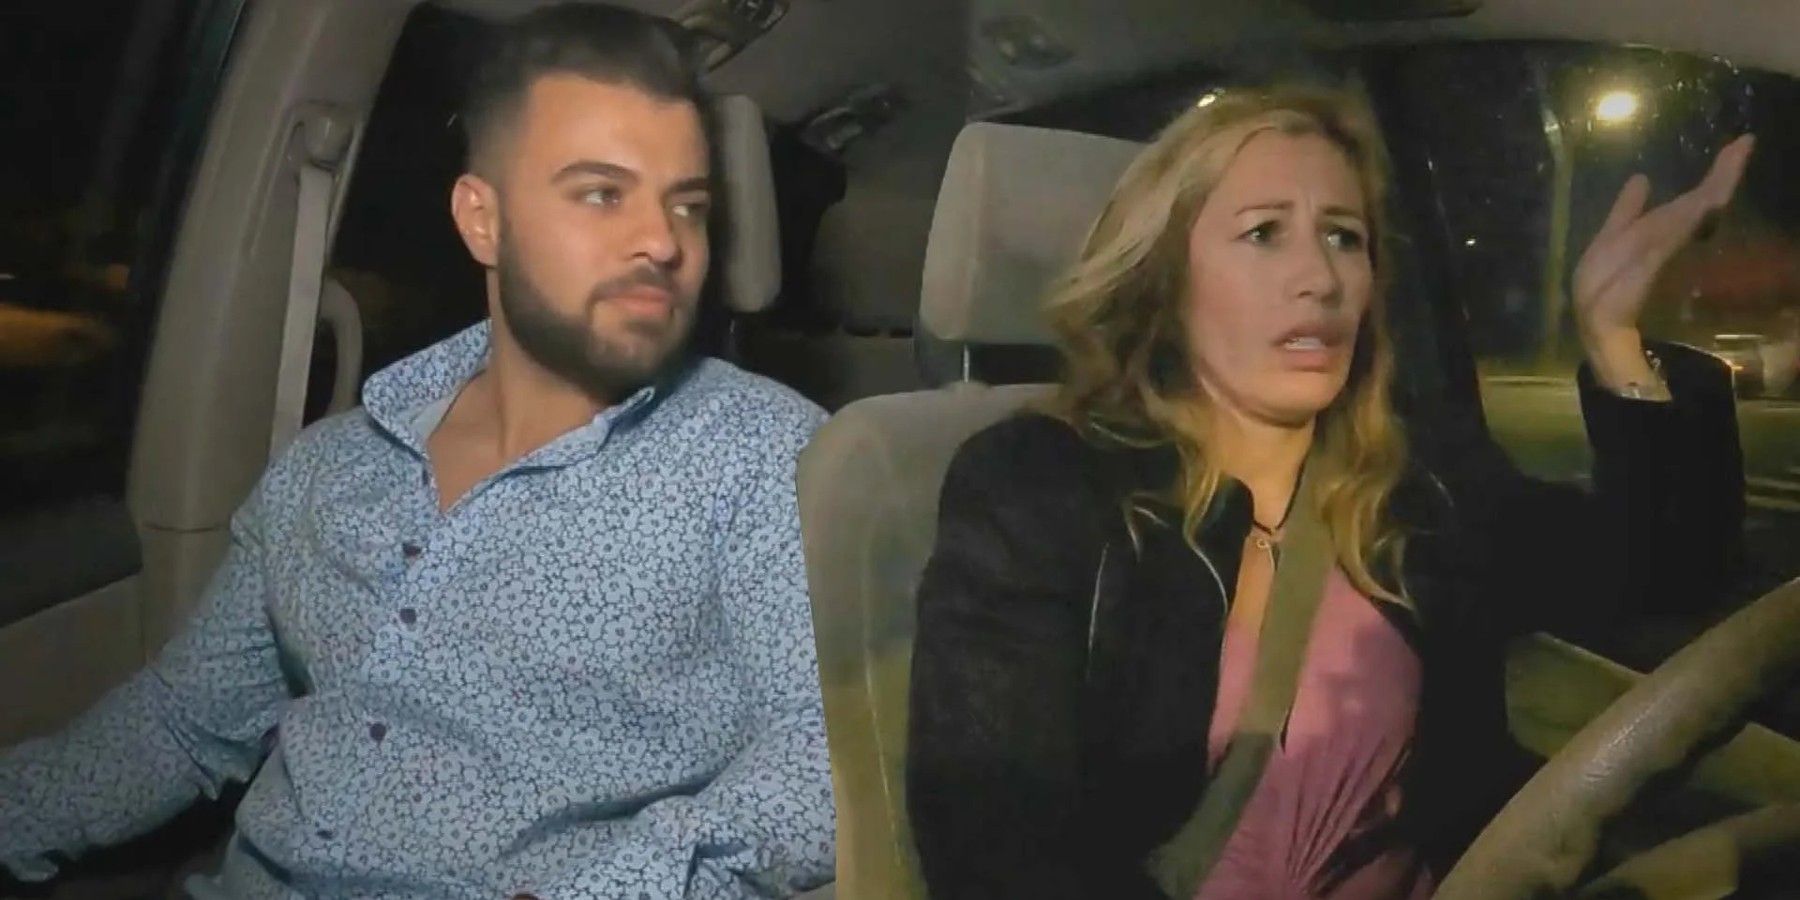 90 Day Fiancé's Yve Arellano and Mohamed Abdelhamed together in a car